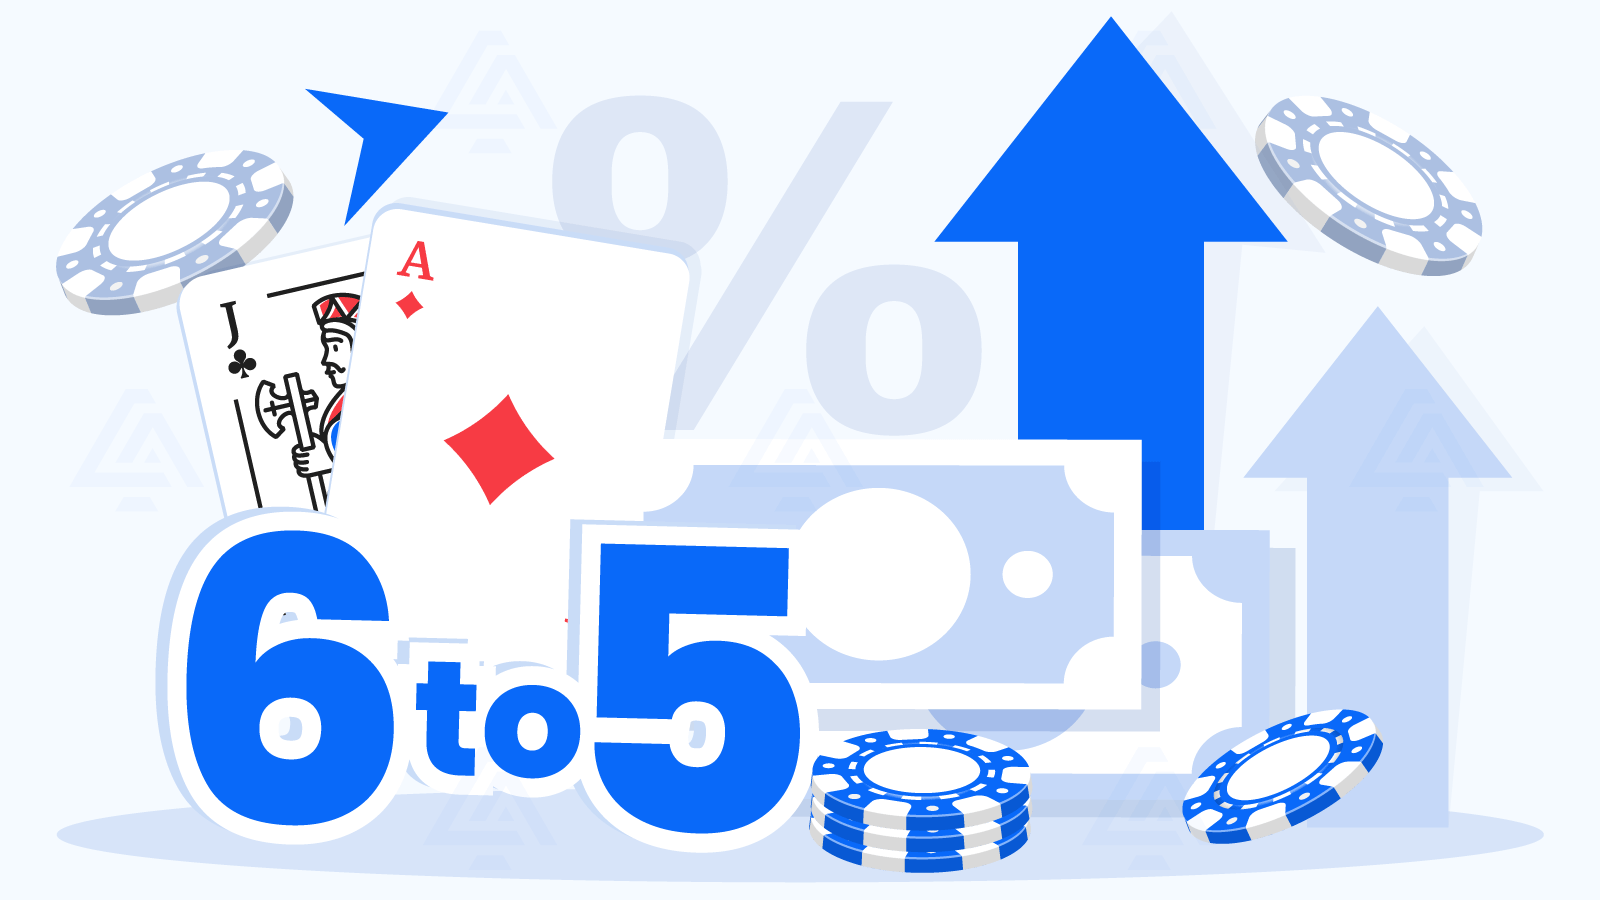 How to Increase Your Odds in 6 to 5 Blackjack